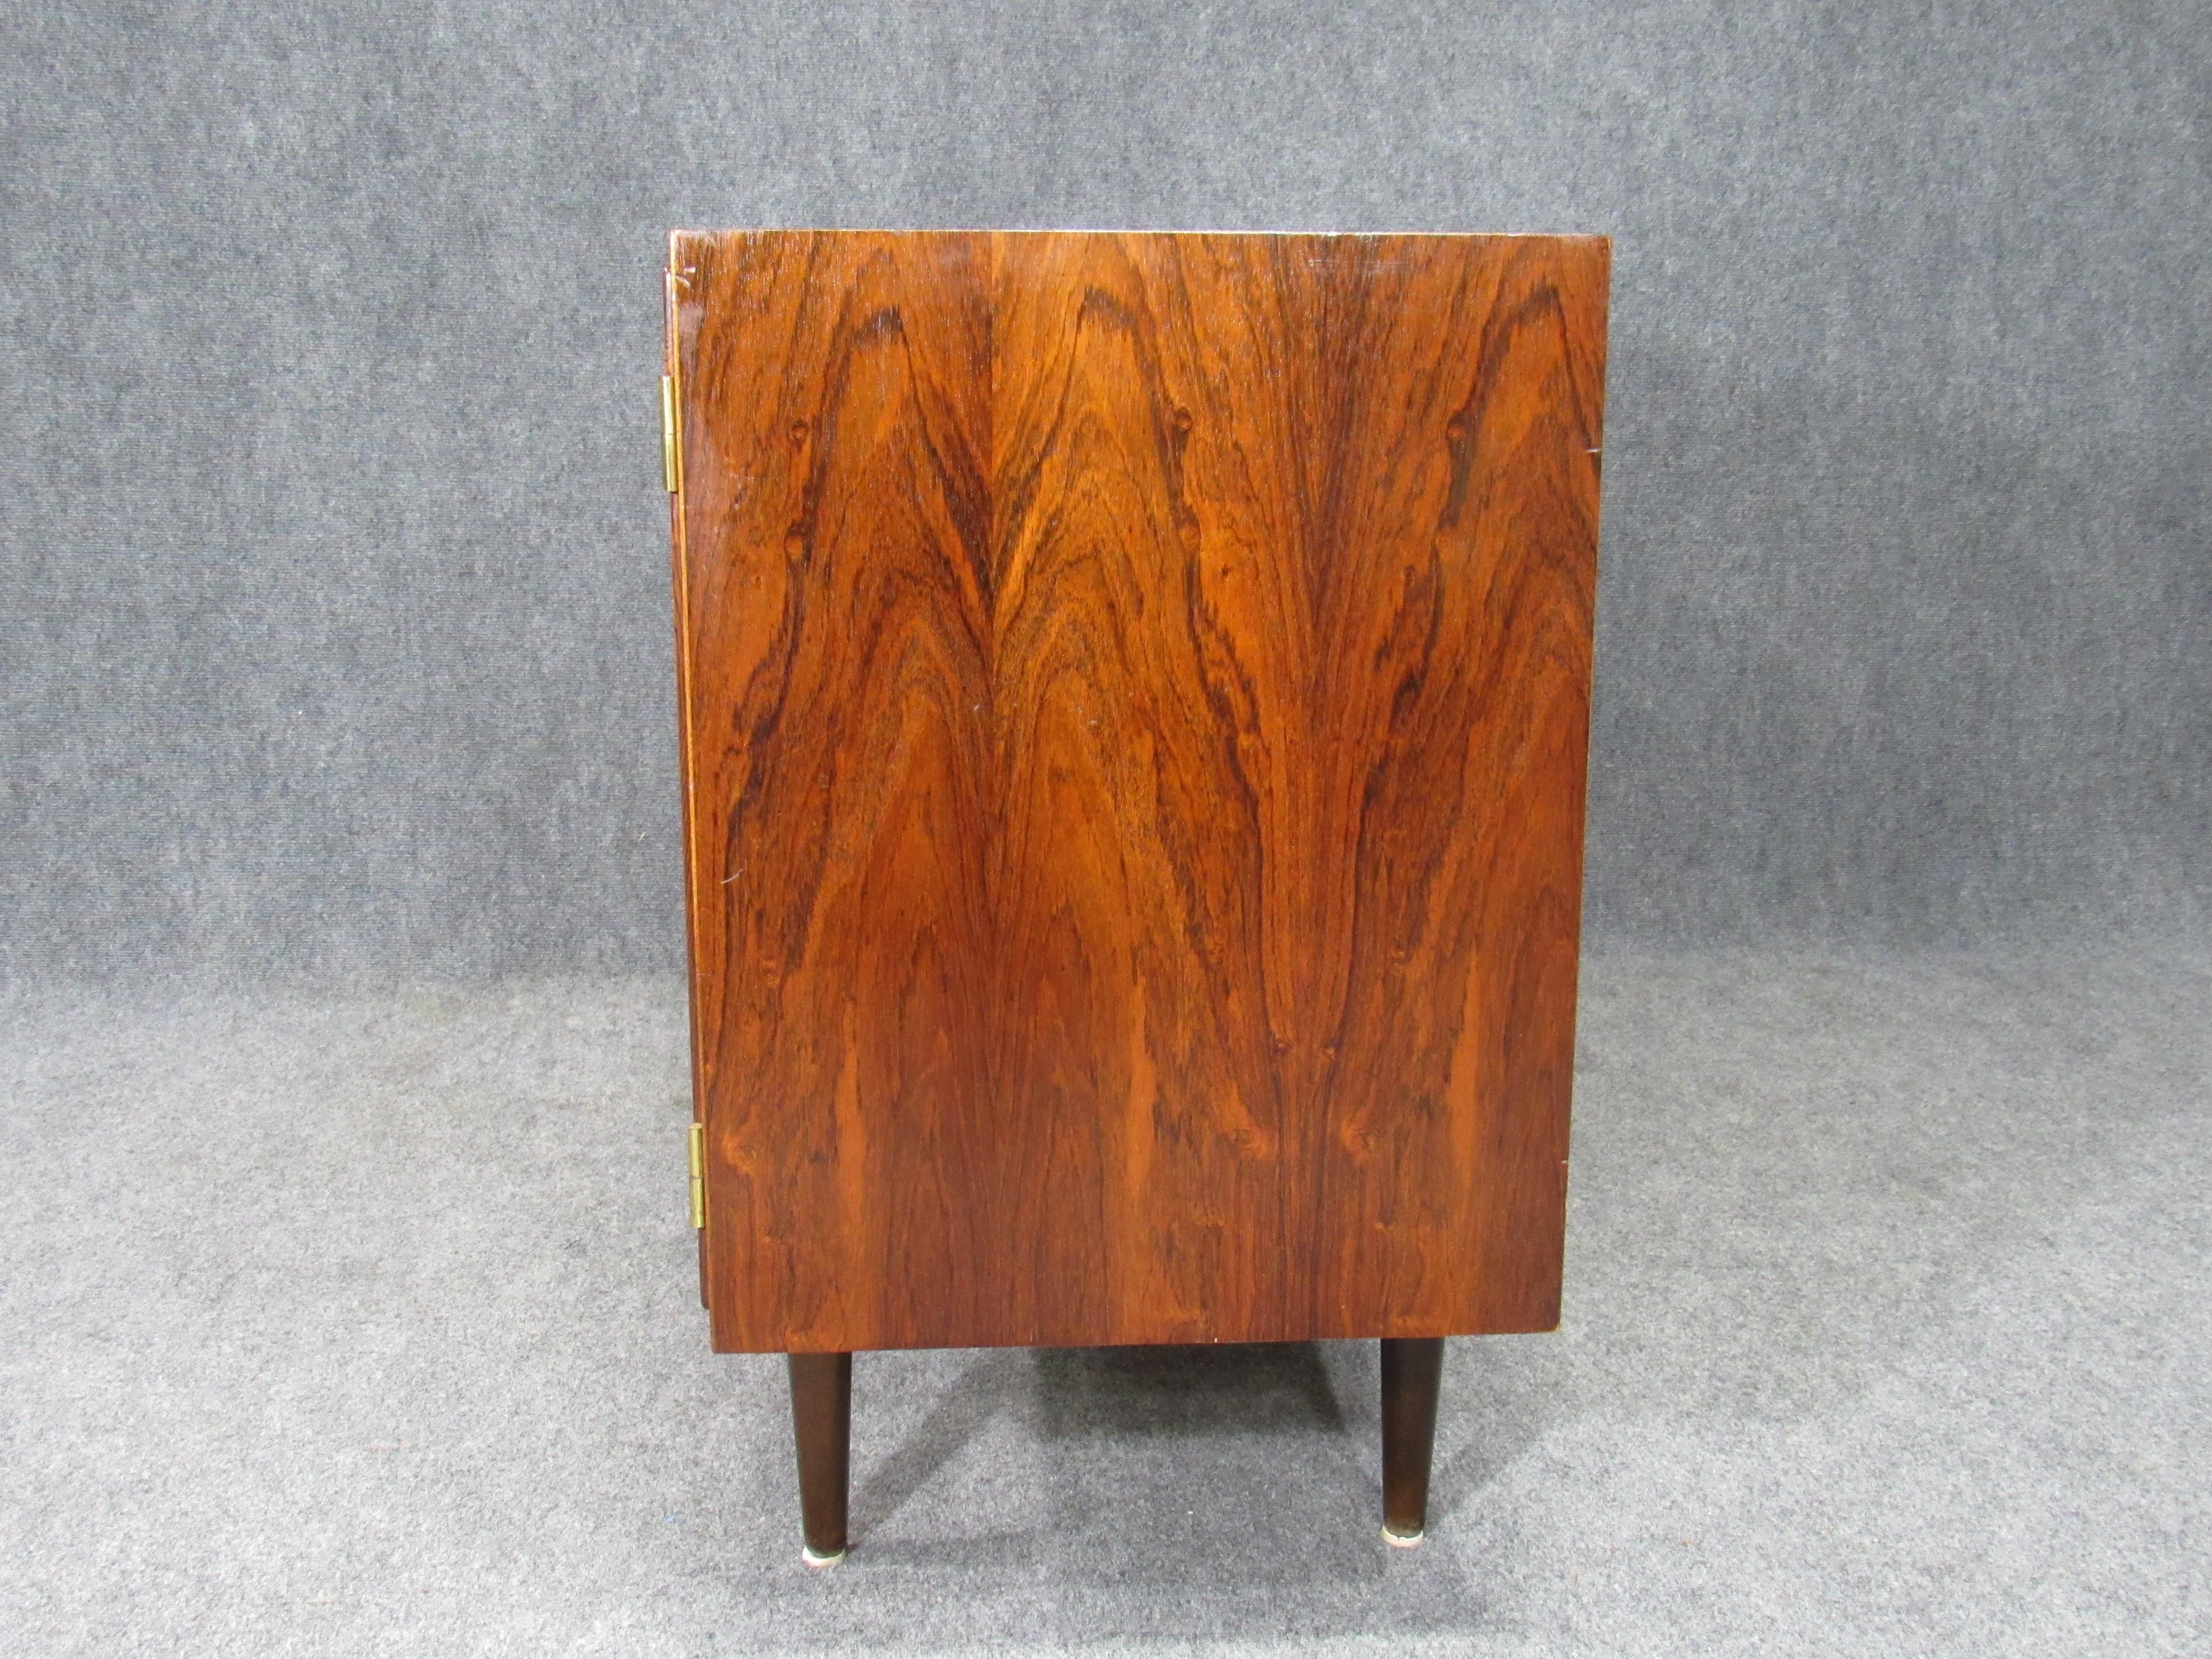 1960s Midcentury Danish Modern Rosewood Credenza Sideboard by Poul Hundevad 3